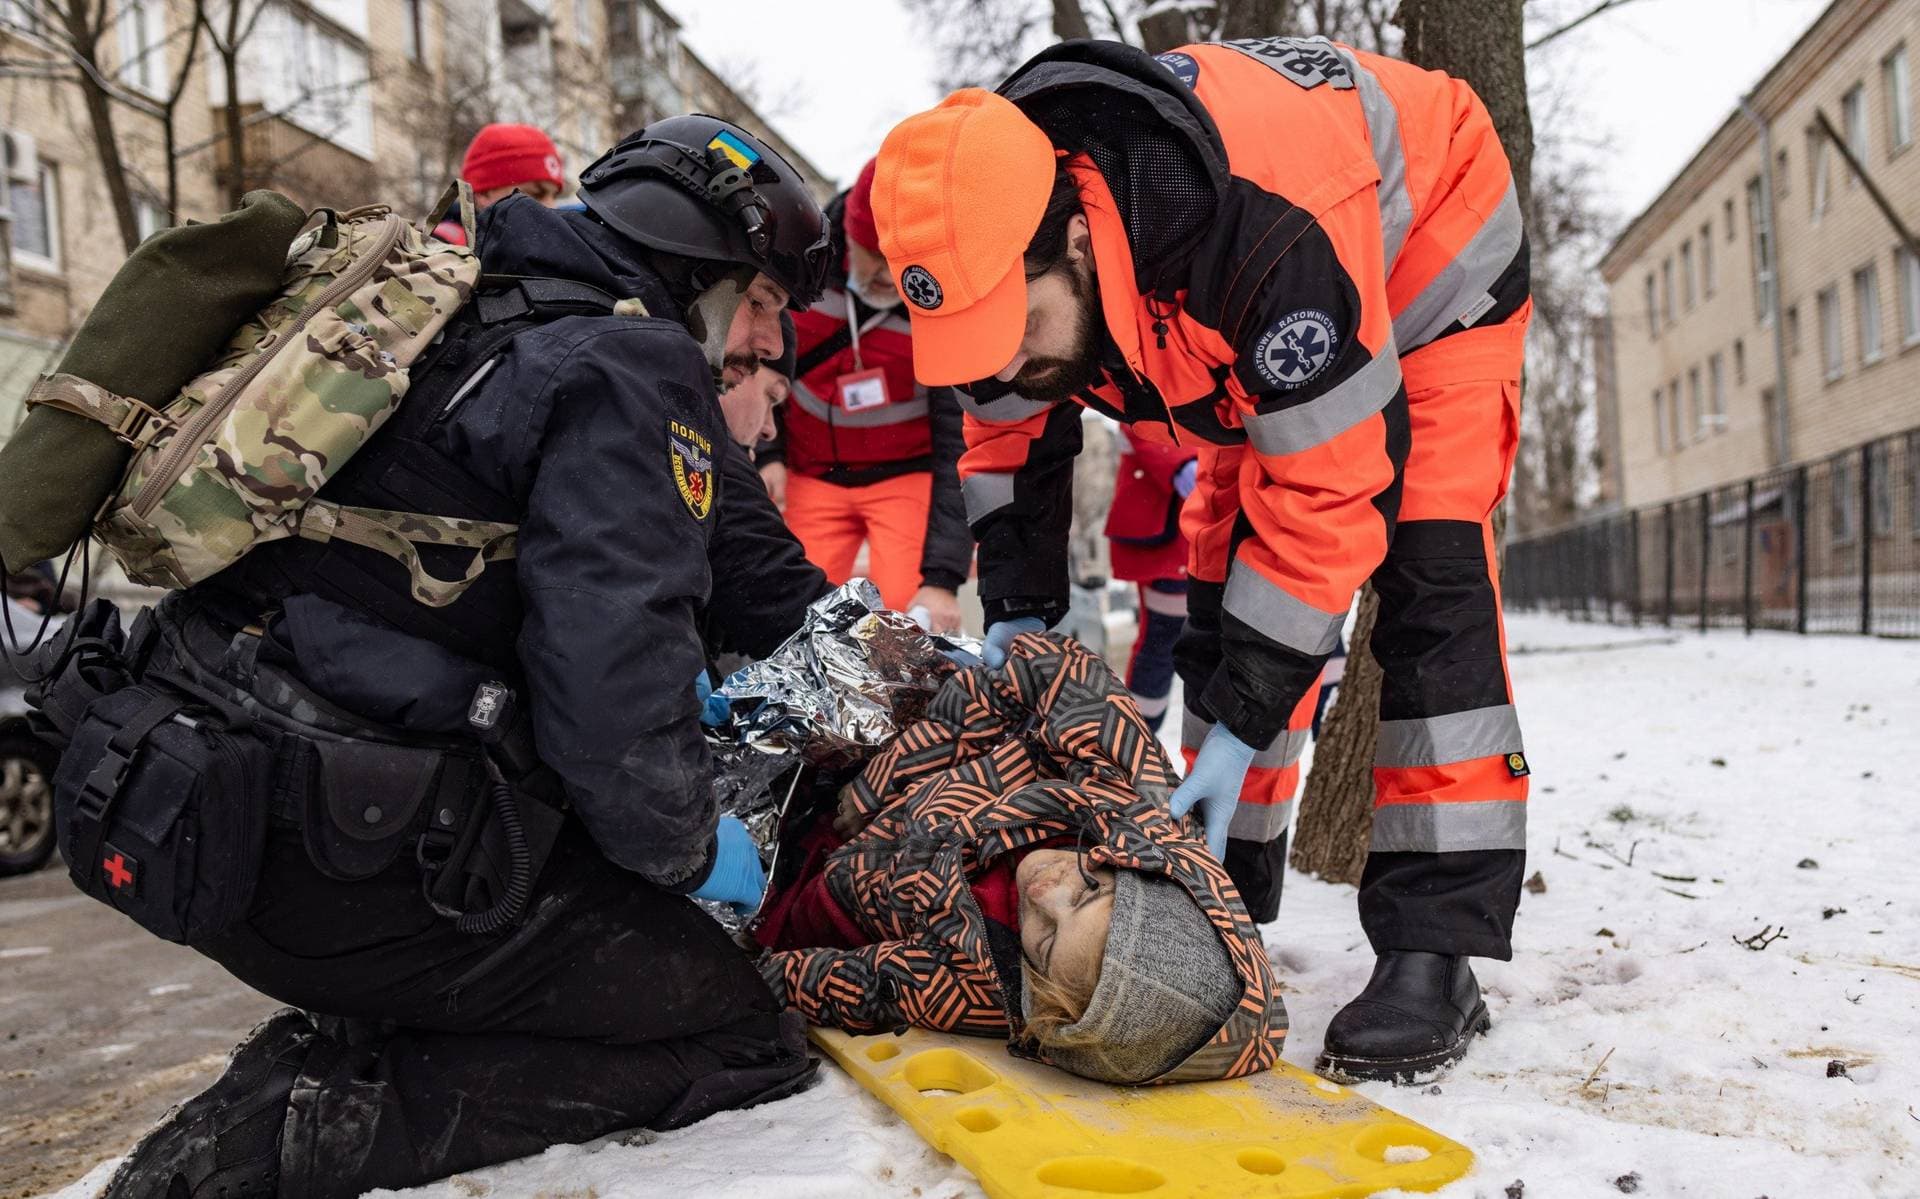 Rescue workers sifted through the rubble for survivors in Kharkiv